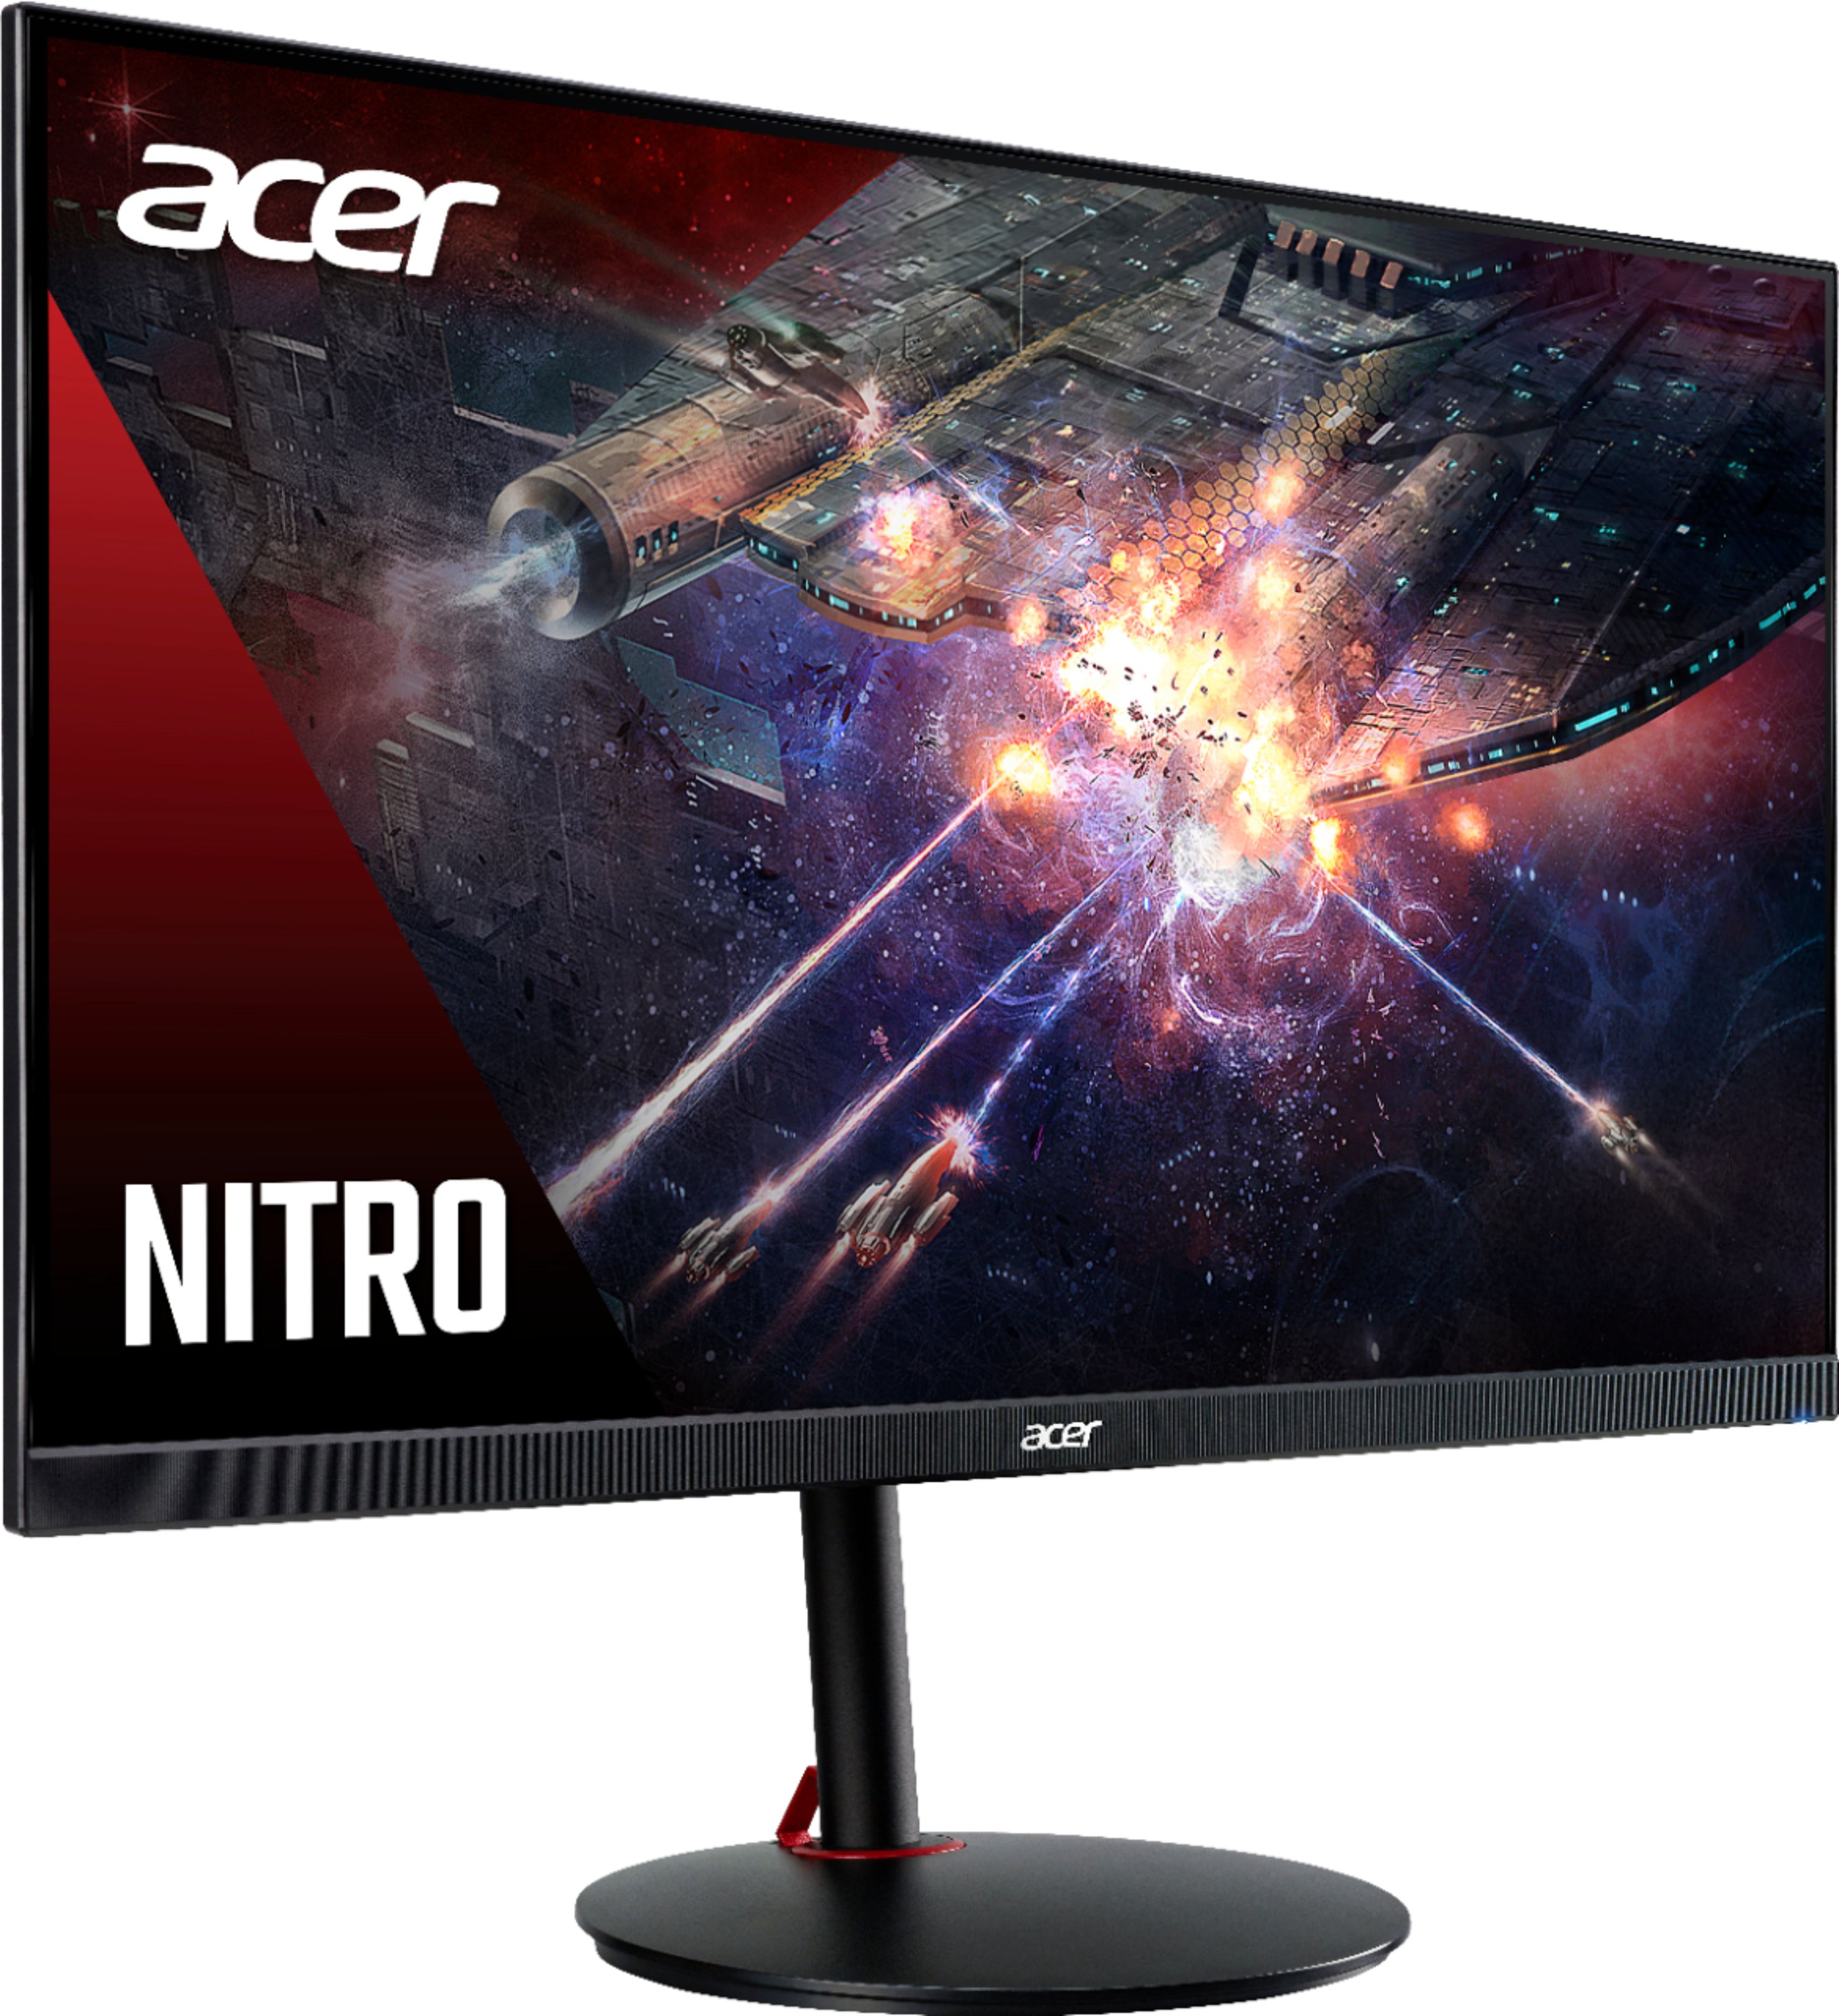 Acer 27" Widescreen LCD Monitor Display Full HD 1920 x 1080 6 ms 60 Hz|V276HL 